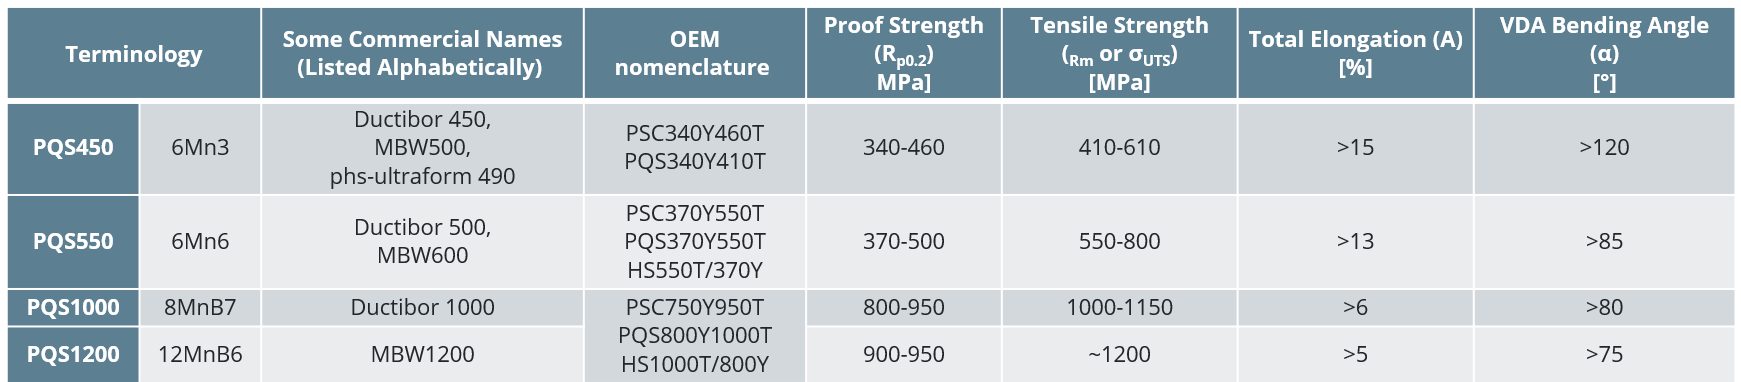 Table 3: Summary of Higher Ductility grades. The terminology descriptions are not standardized. Higher Ductility grade names are based on their properties and terminology is derived from a possible chemistry or OEM description. The properties listed here encompass those presented in multiple sources and may or may not be associated with any one specific commercial grade.Y-12, T-28, G-32